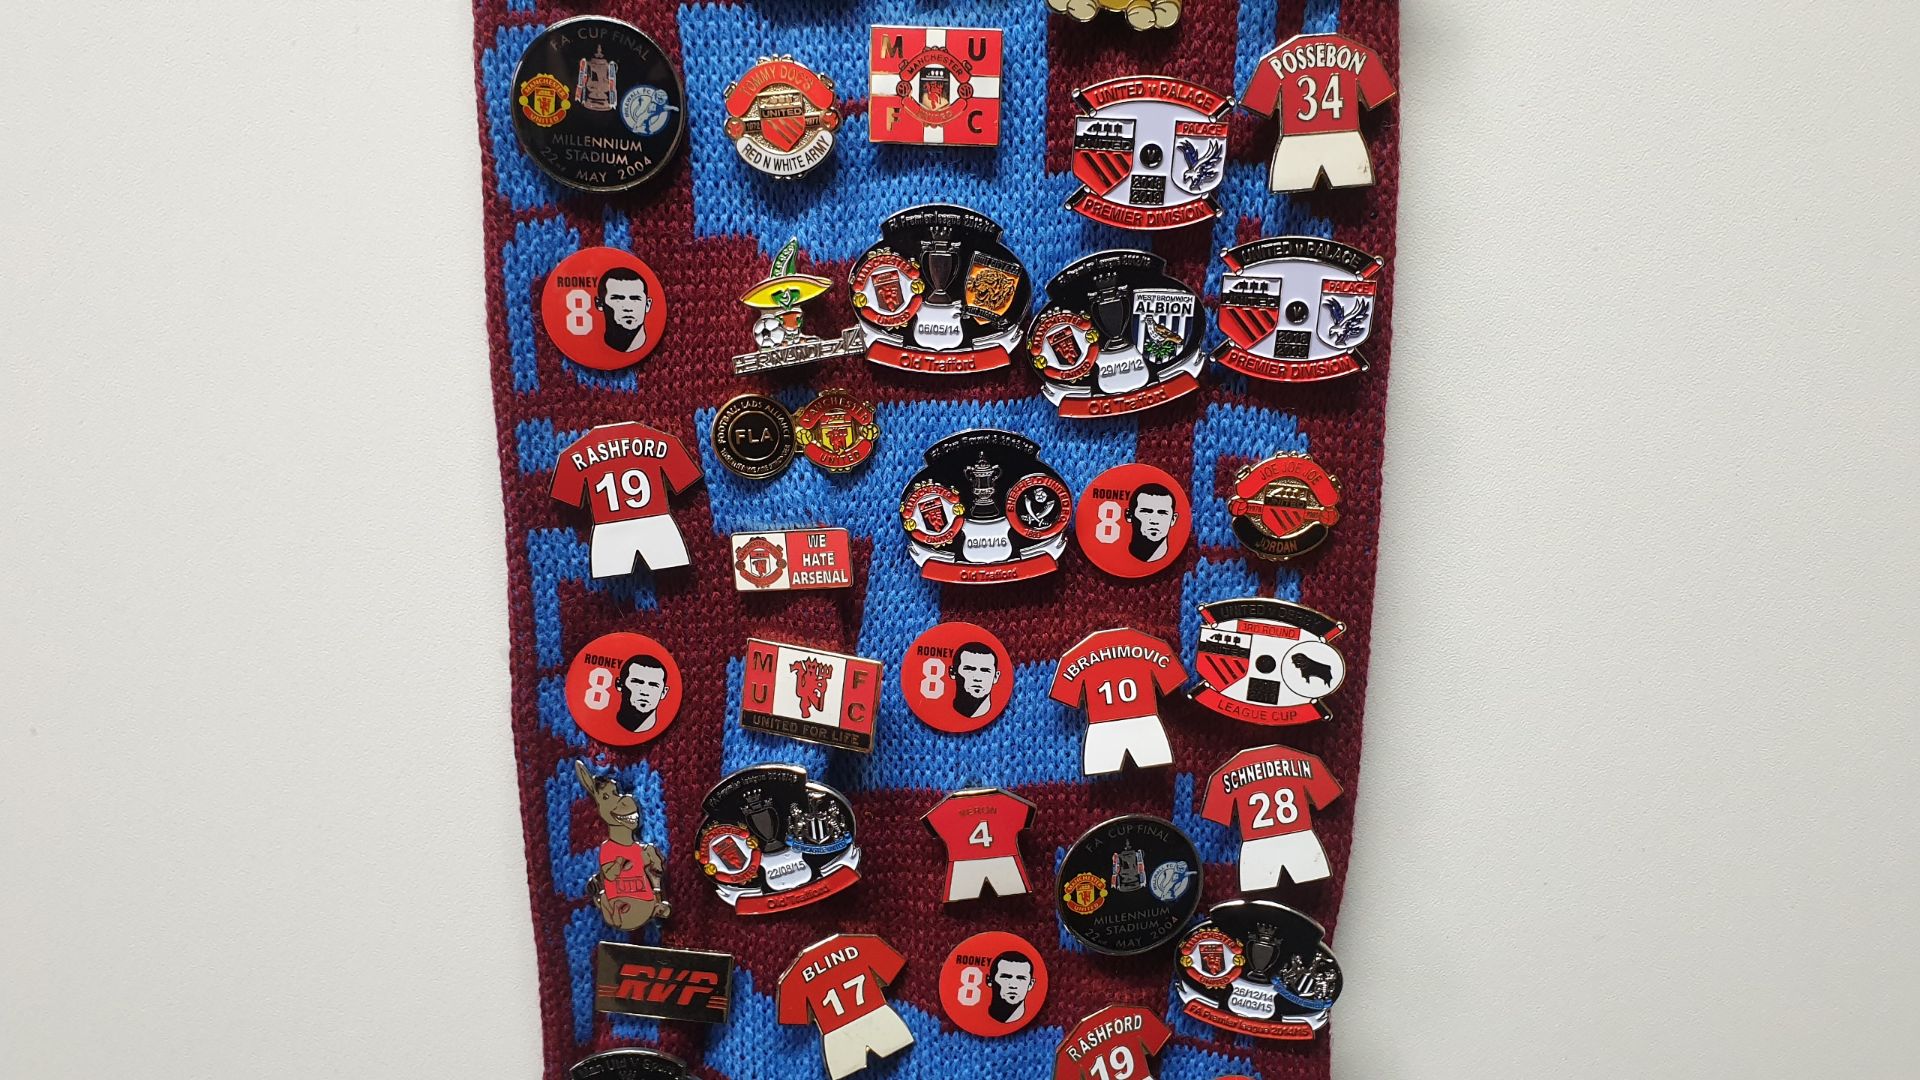 MANCHESTER UNITED SCARF CONTAINING APPROX 200 X PIN BADGES IE MUFC, BATTLE FOR MANCHESTER, ROONEY, - Image 4 of 8